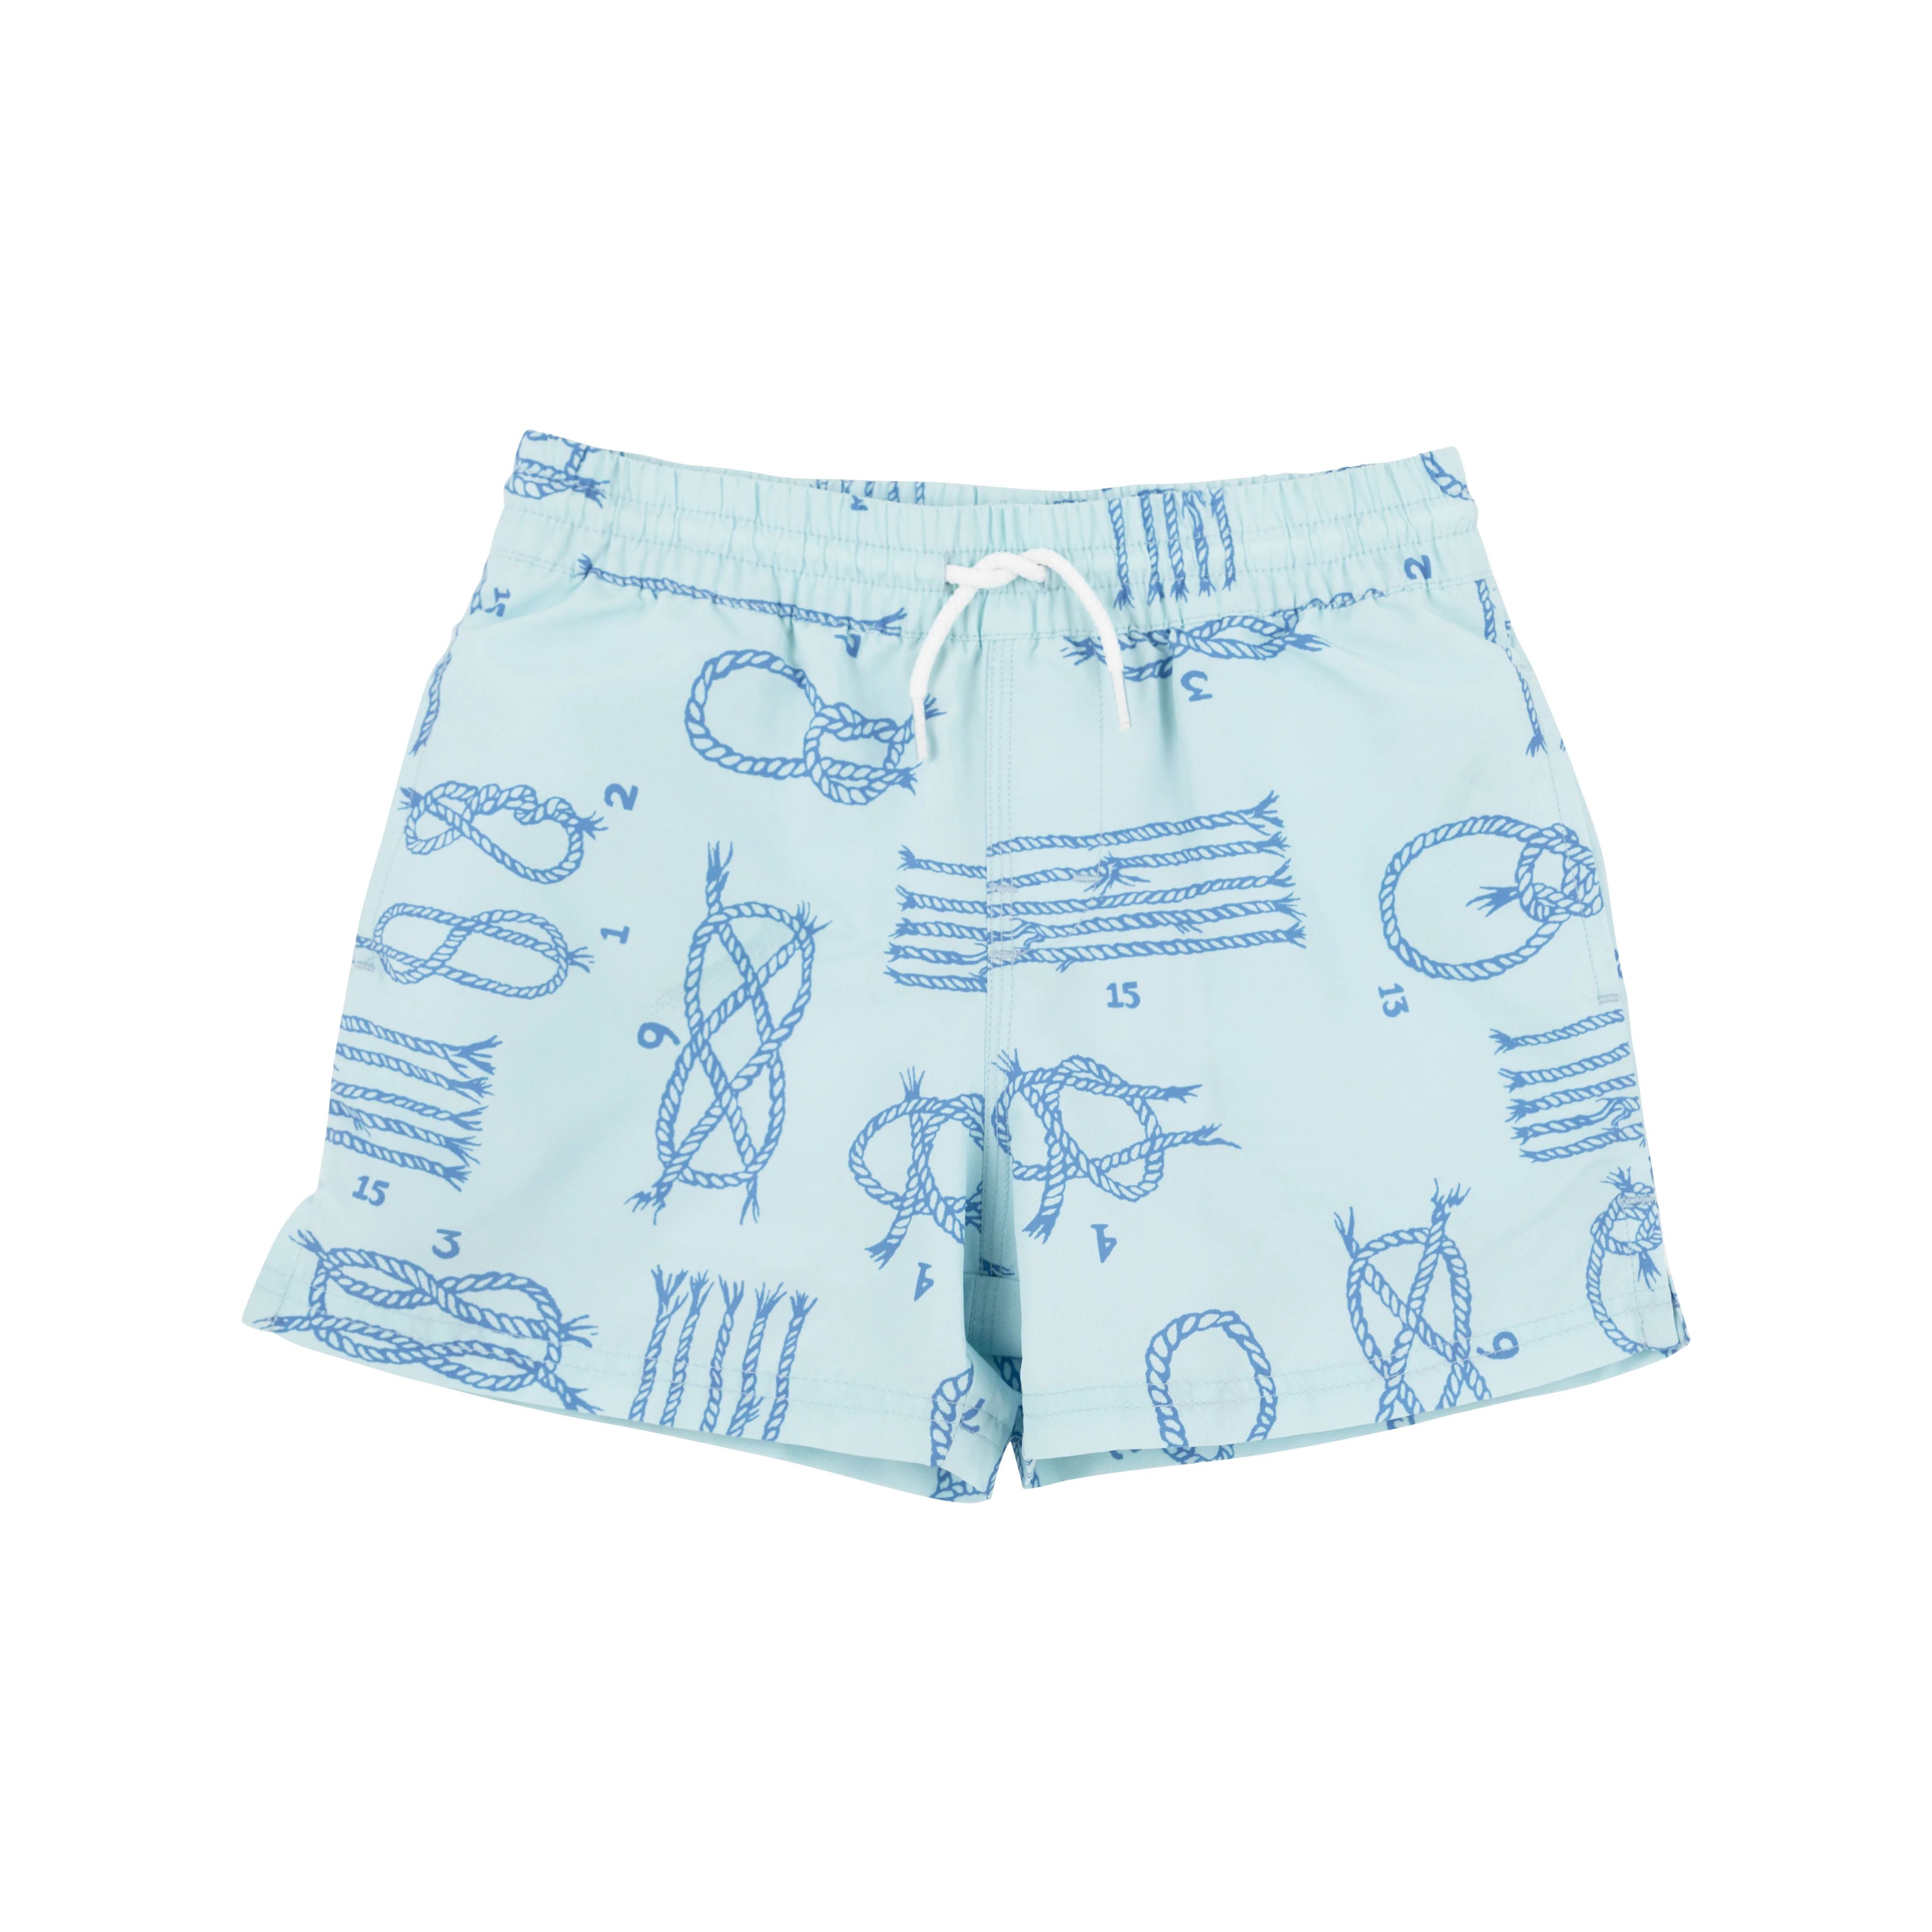 Tortola Trunks - Yachts of Knots with Worth Avenue White | The Beaufort Bonnet Company